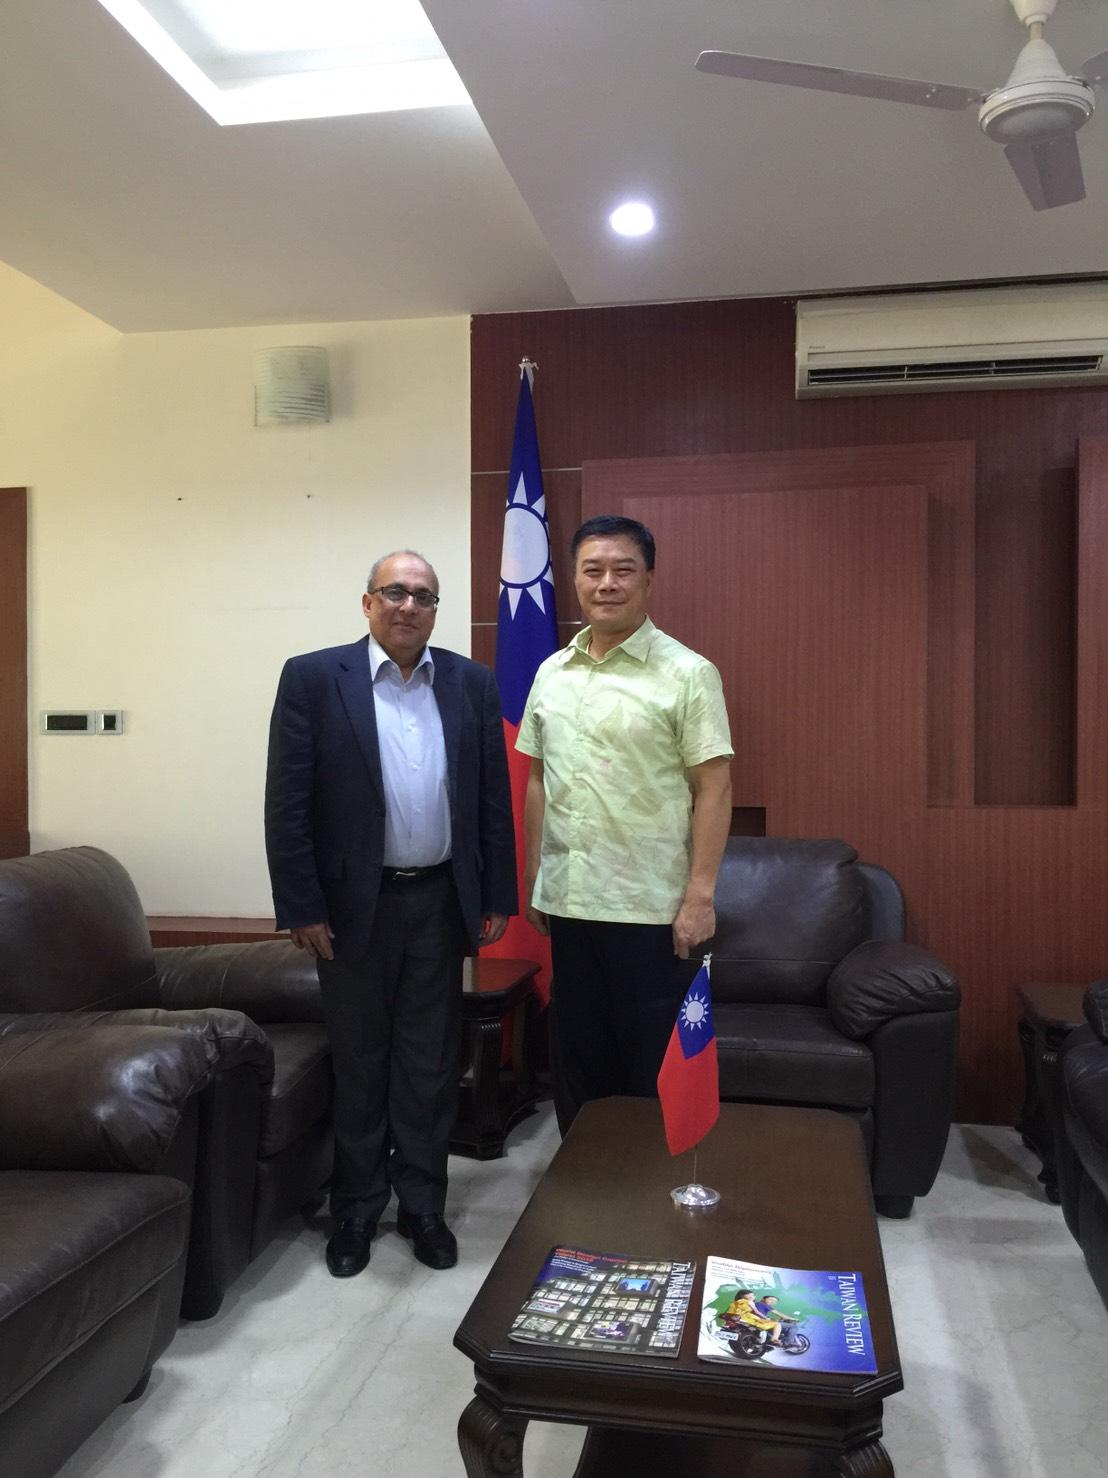 The CEO of Znergy Solar Project &amp; Services, Mr. Rohit Rabindernath calls on Director General Charles Li.